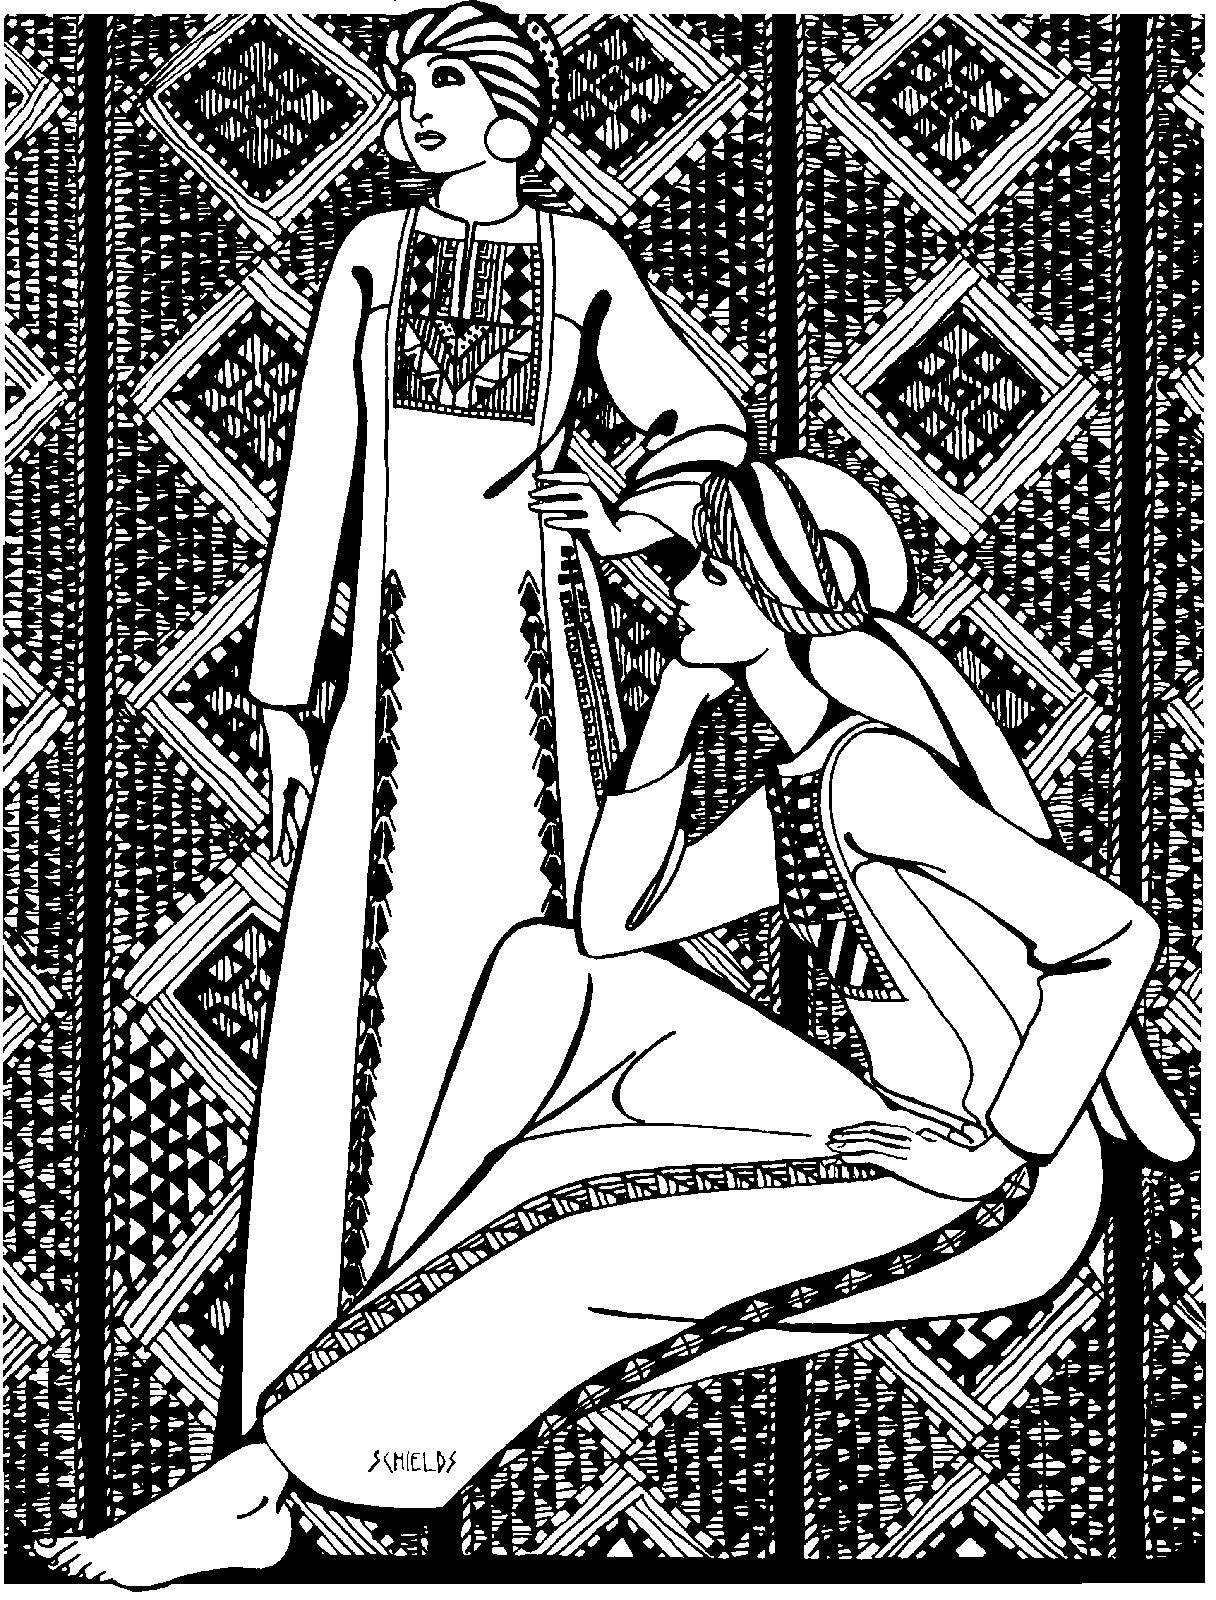 black and white pen and ink drawing of two women, one sitting, one standing, in embroidered Gaza Dresses.  Illustration by Gretchen Schields